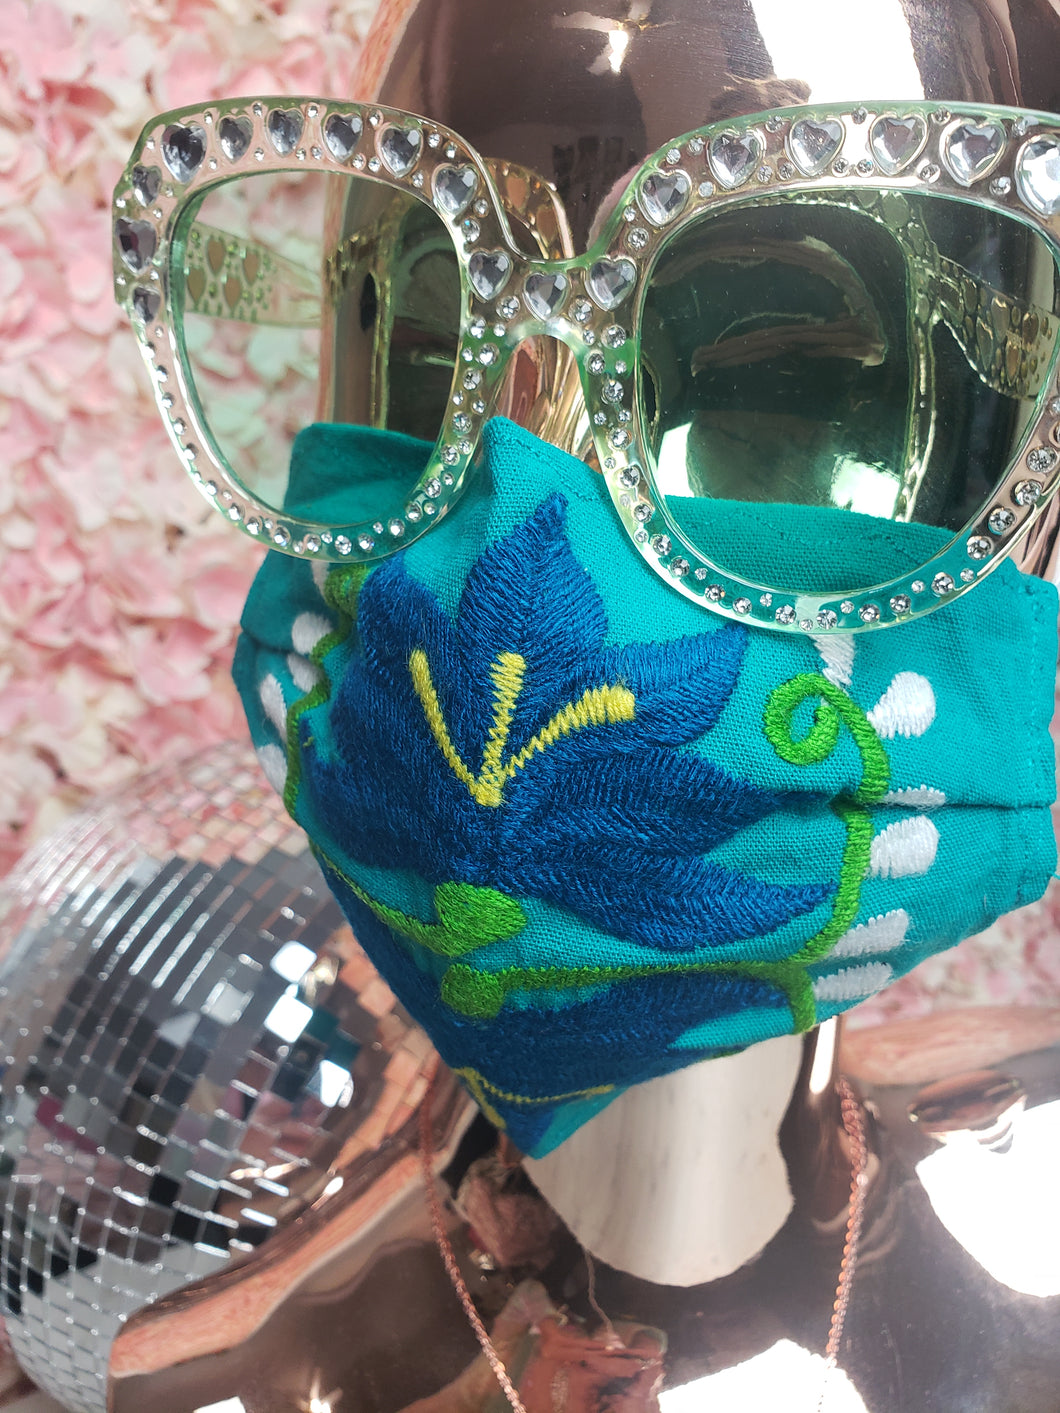 Teel, Navy, Green & White Floral Embroidery Mask